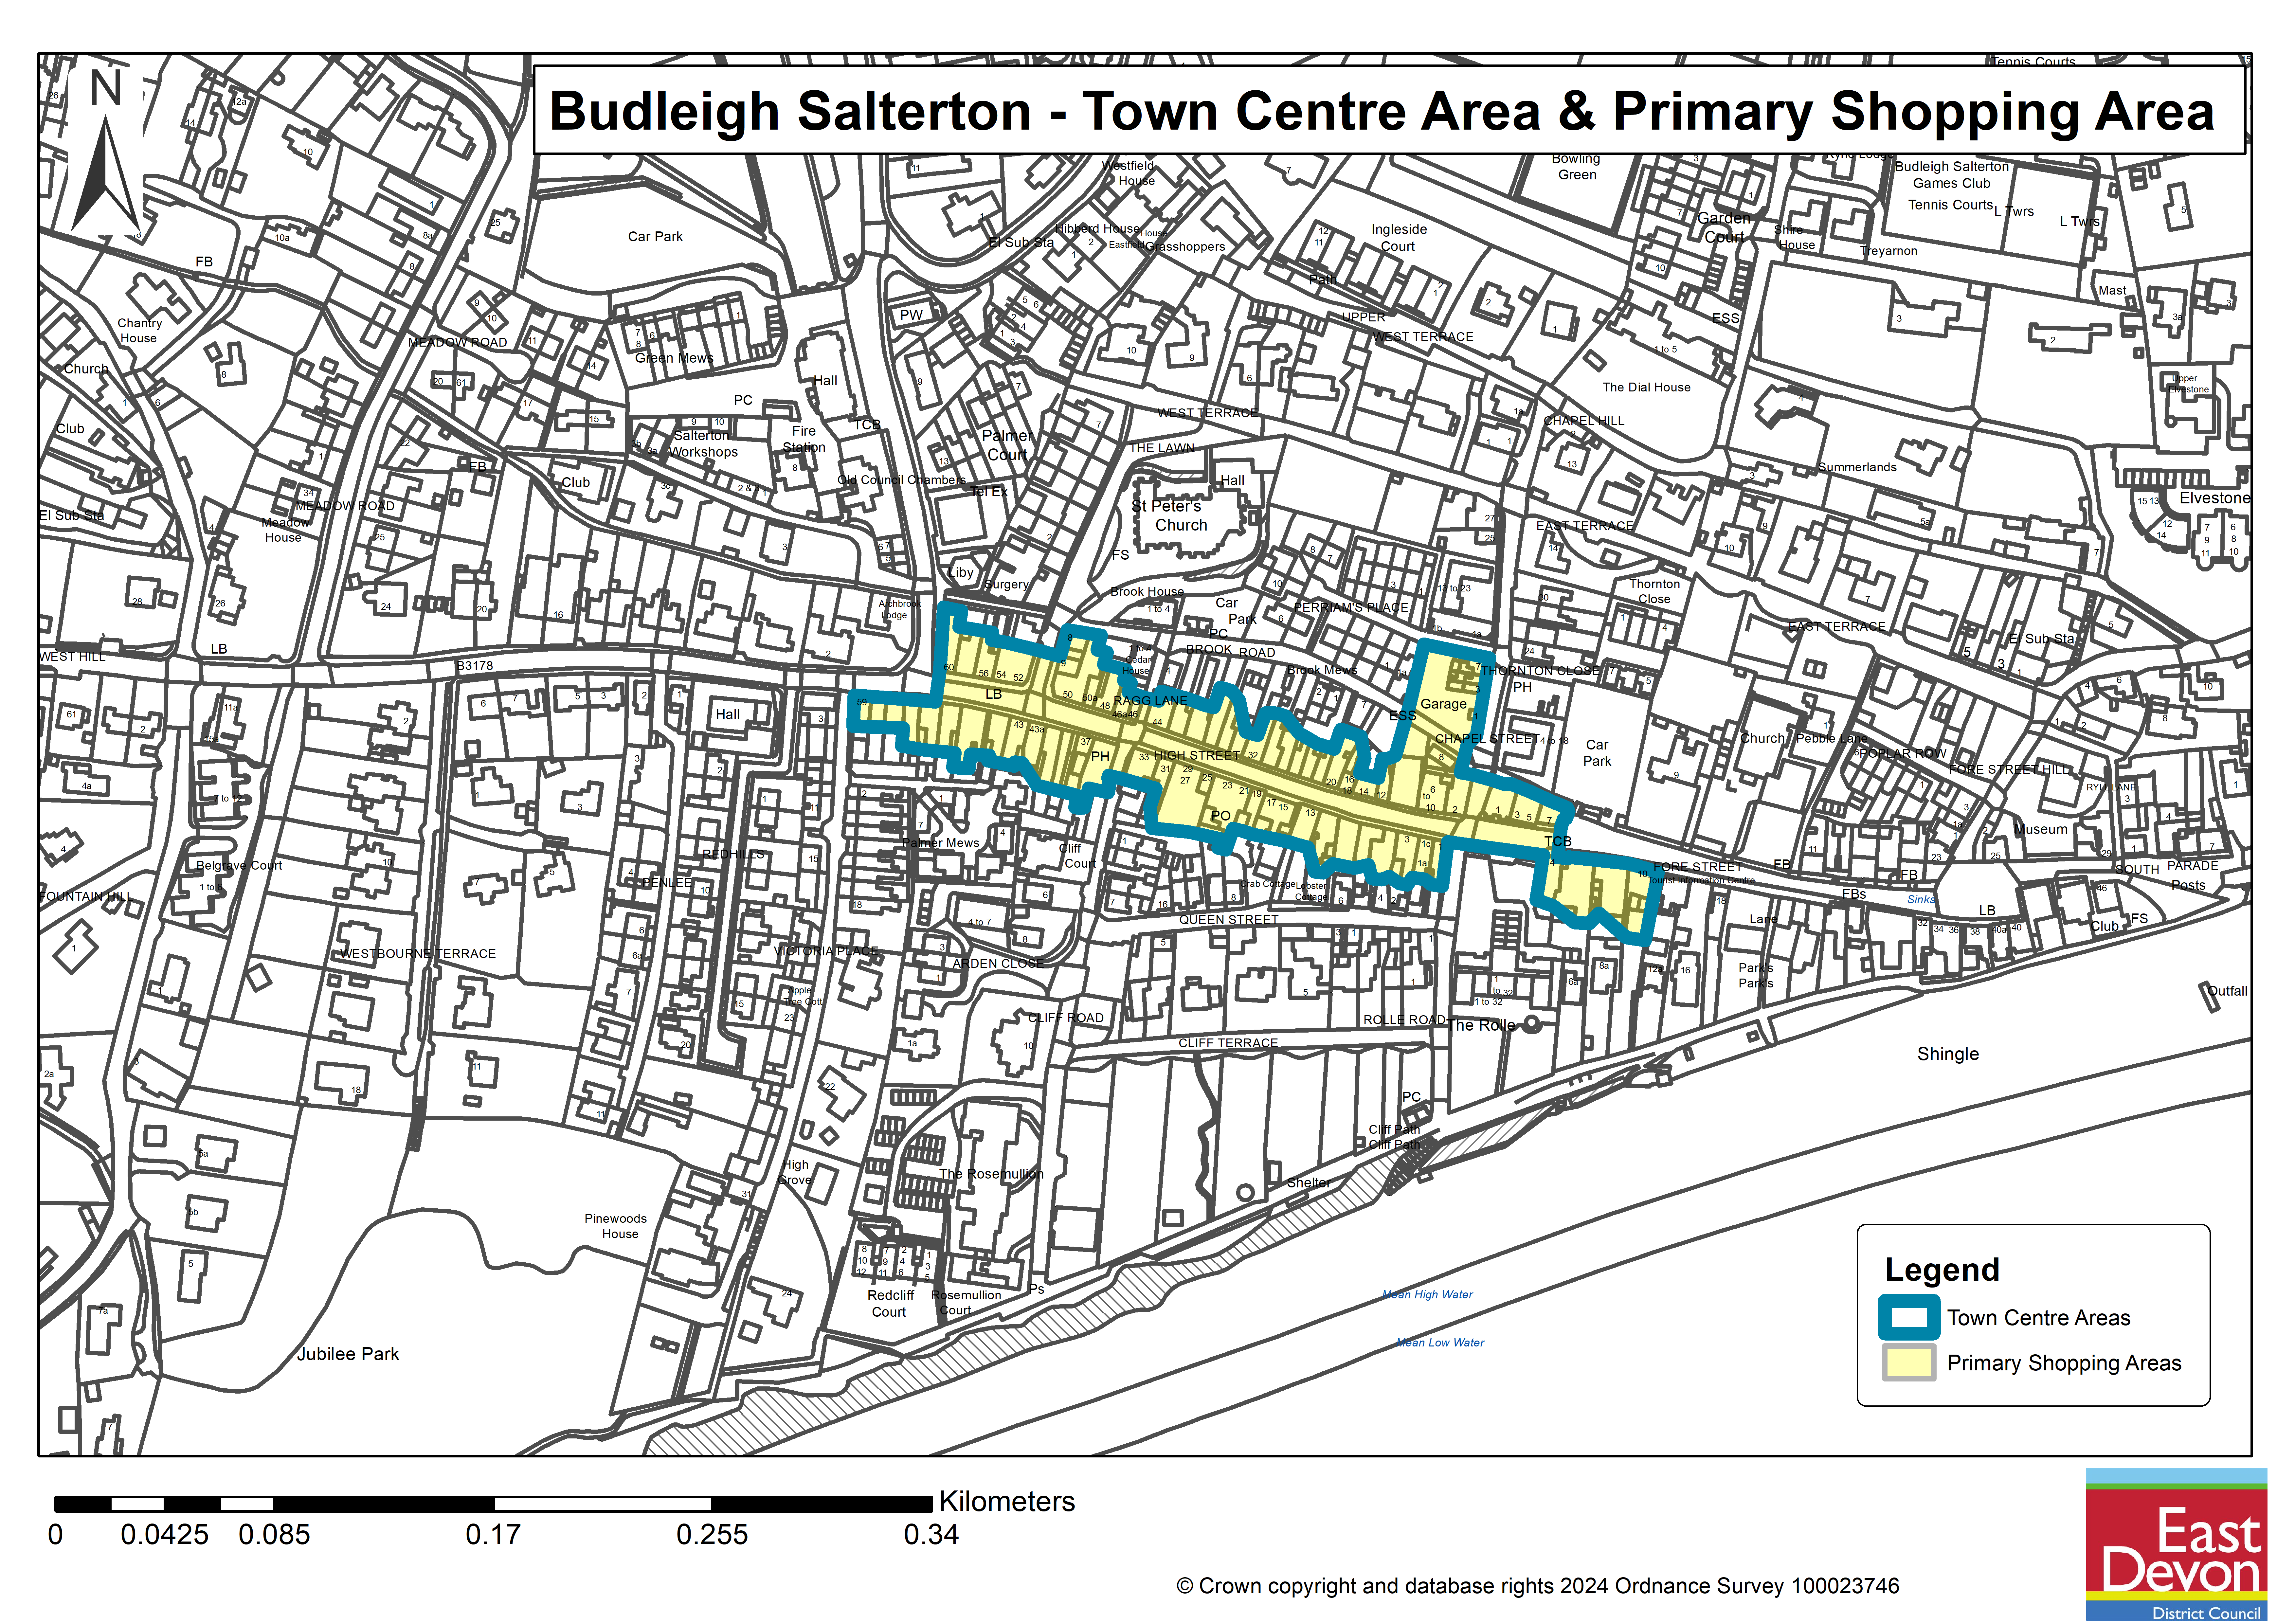 Map of the proposed Budliegh Salterton Town Centre Area and Primary Shopping Area